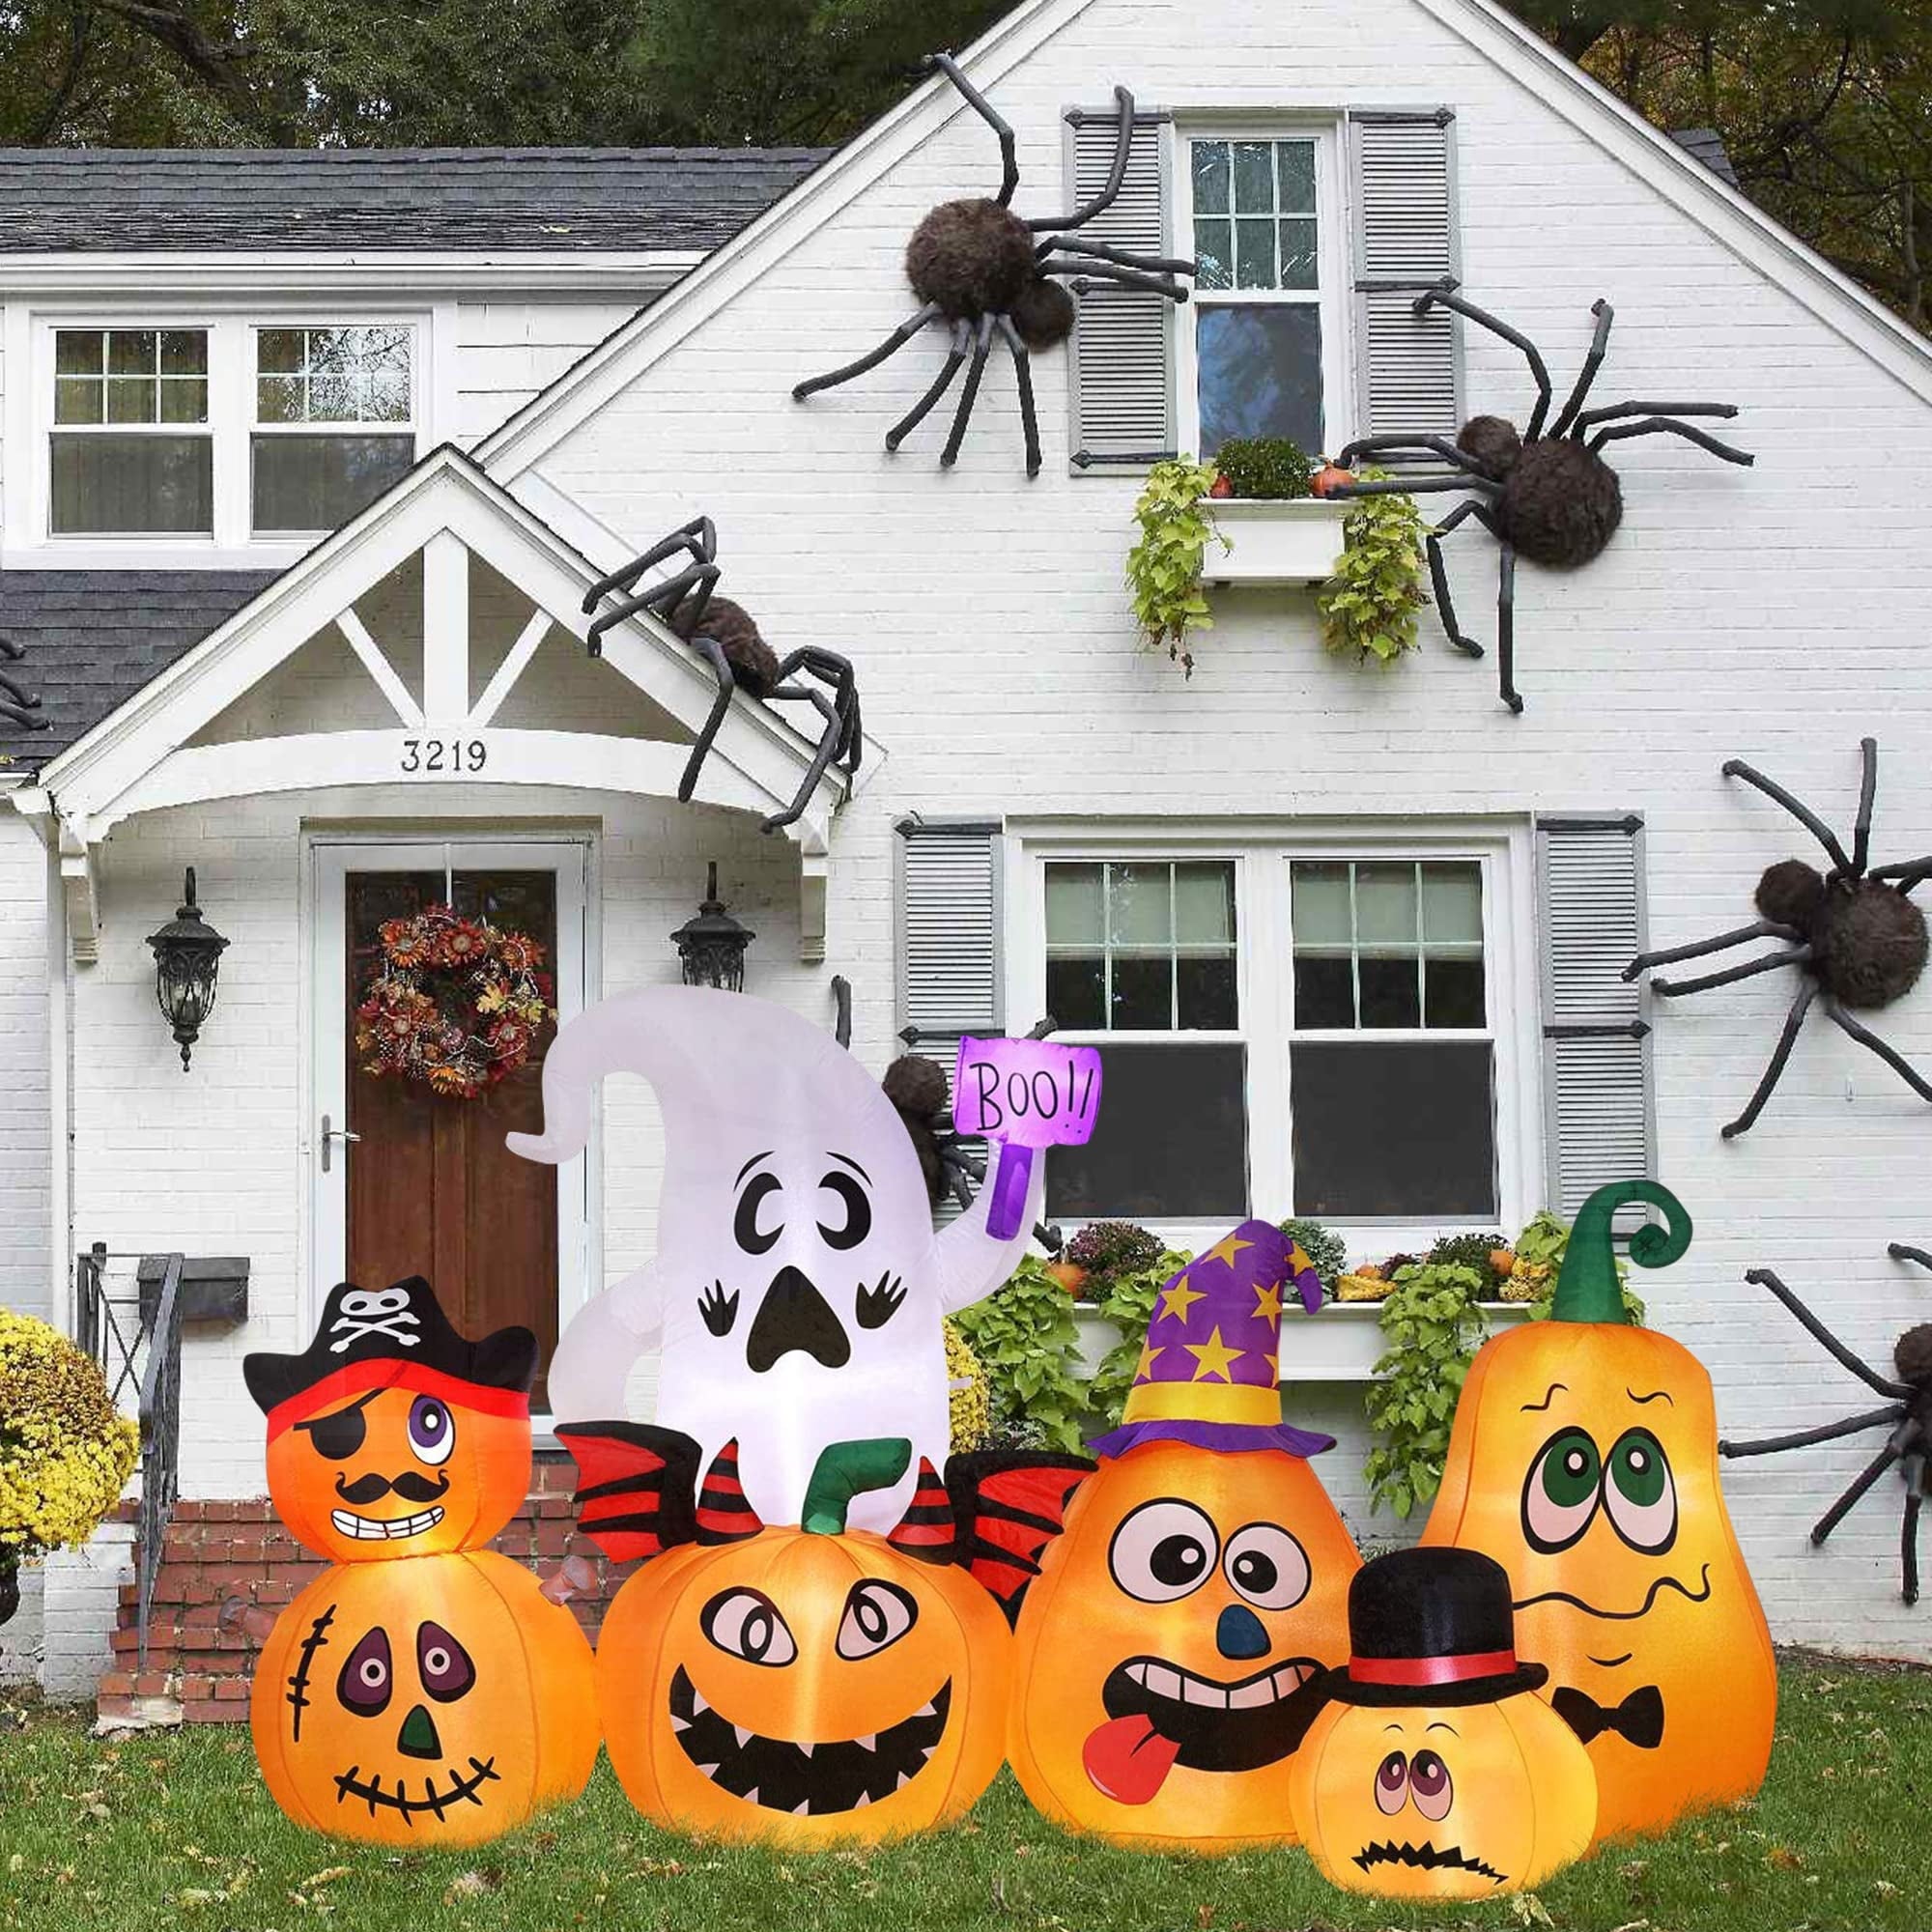 8FT Halloween Inflatables, Built-in LED Lights, Outdoor Blow-Up Halloween Decorations